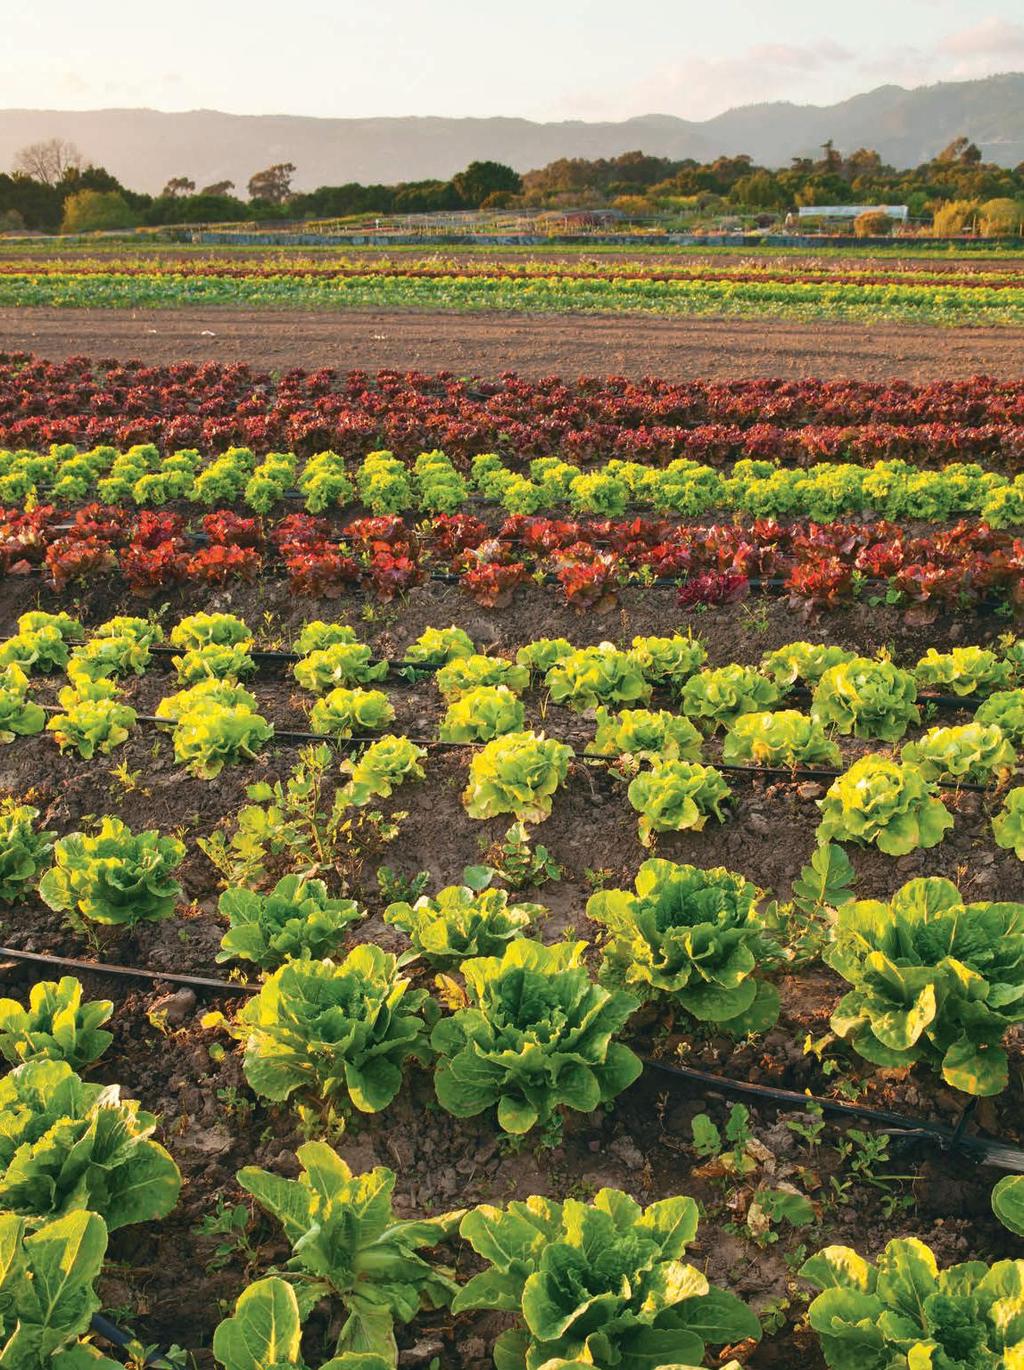 CHUCK PLACE/ALAMY STOCK PHOTO A selection of lettuce varieties at